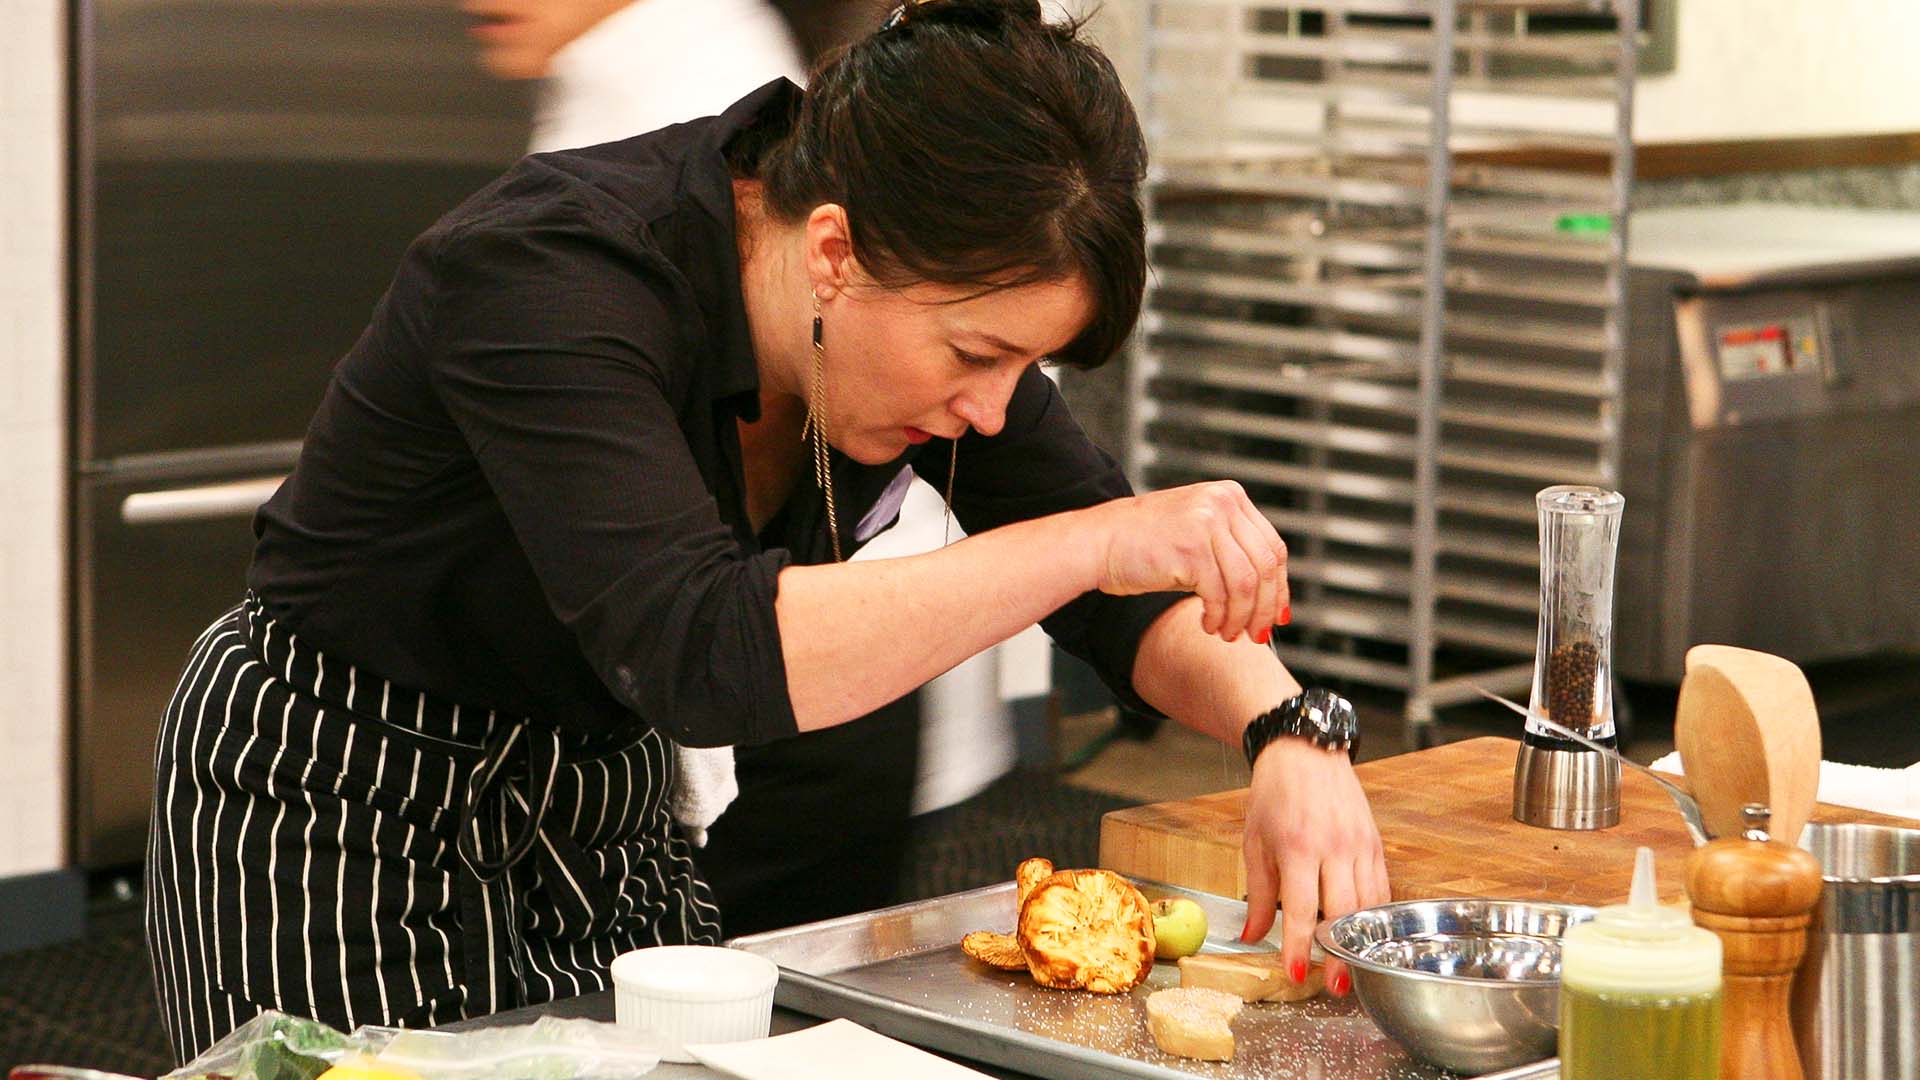 Chef Naomi Pomeroy from television's Top Chef died in a tubing accident at the age of 49.